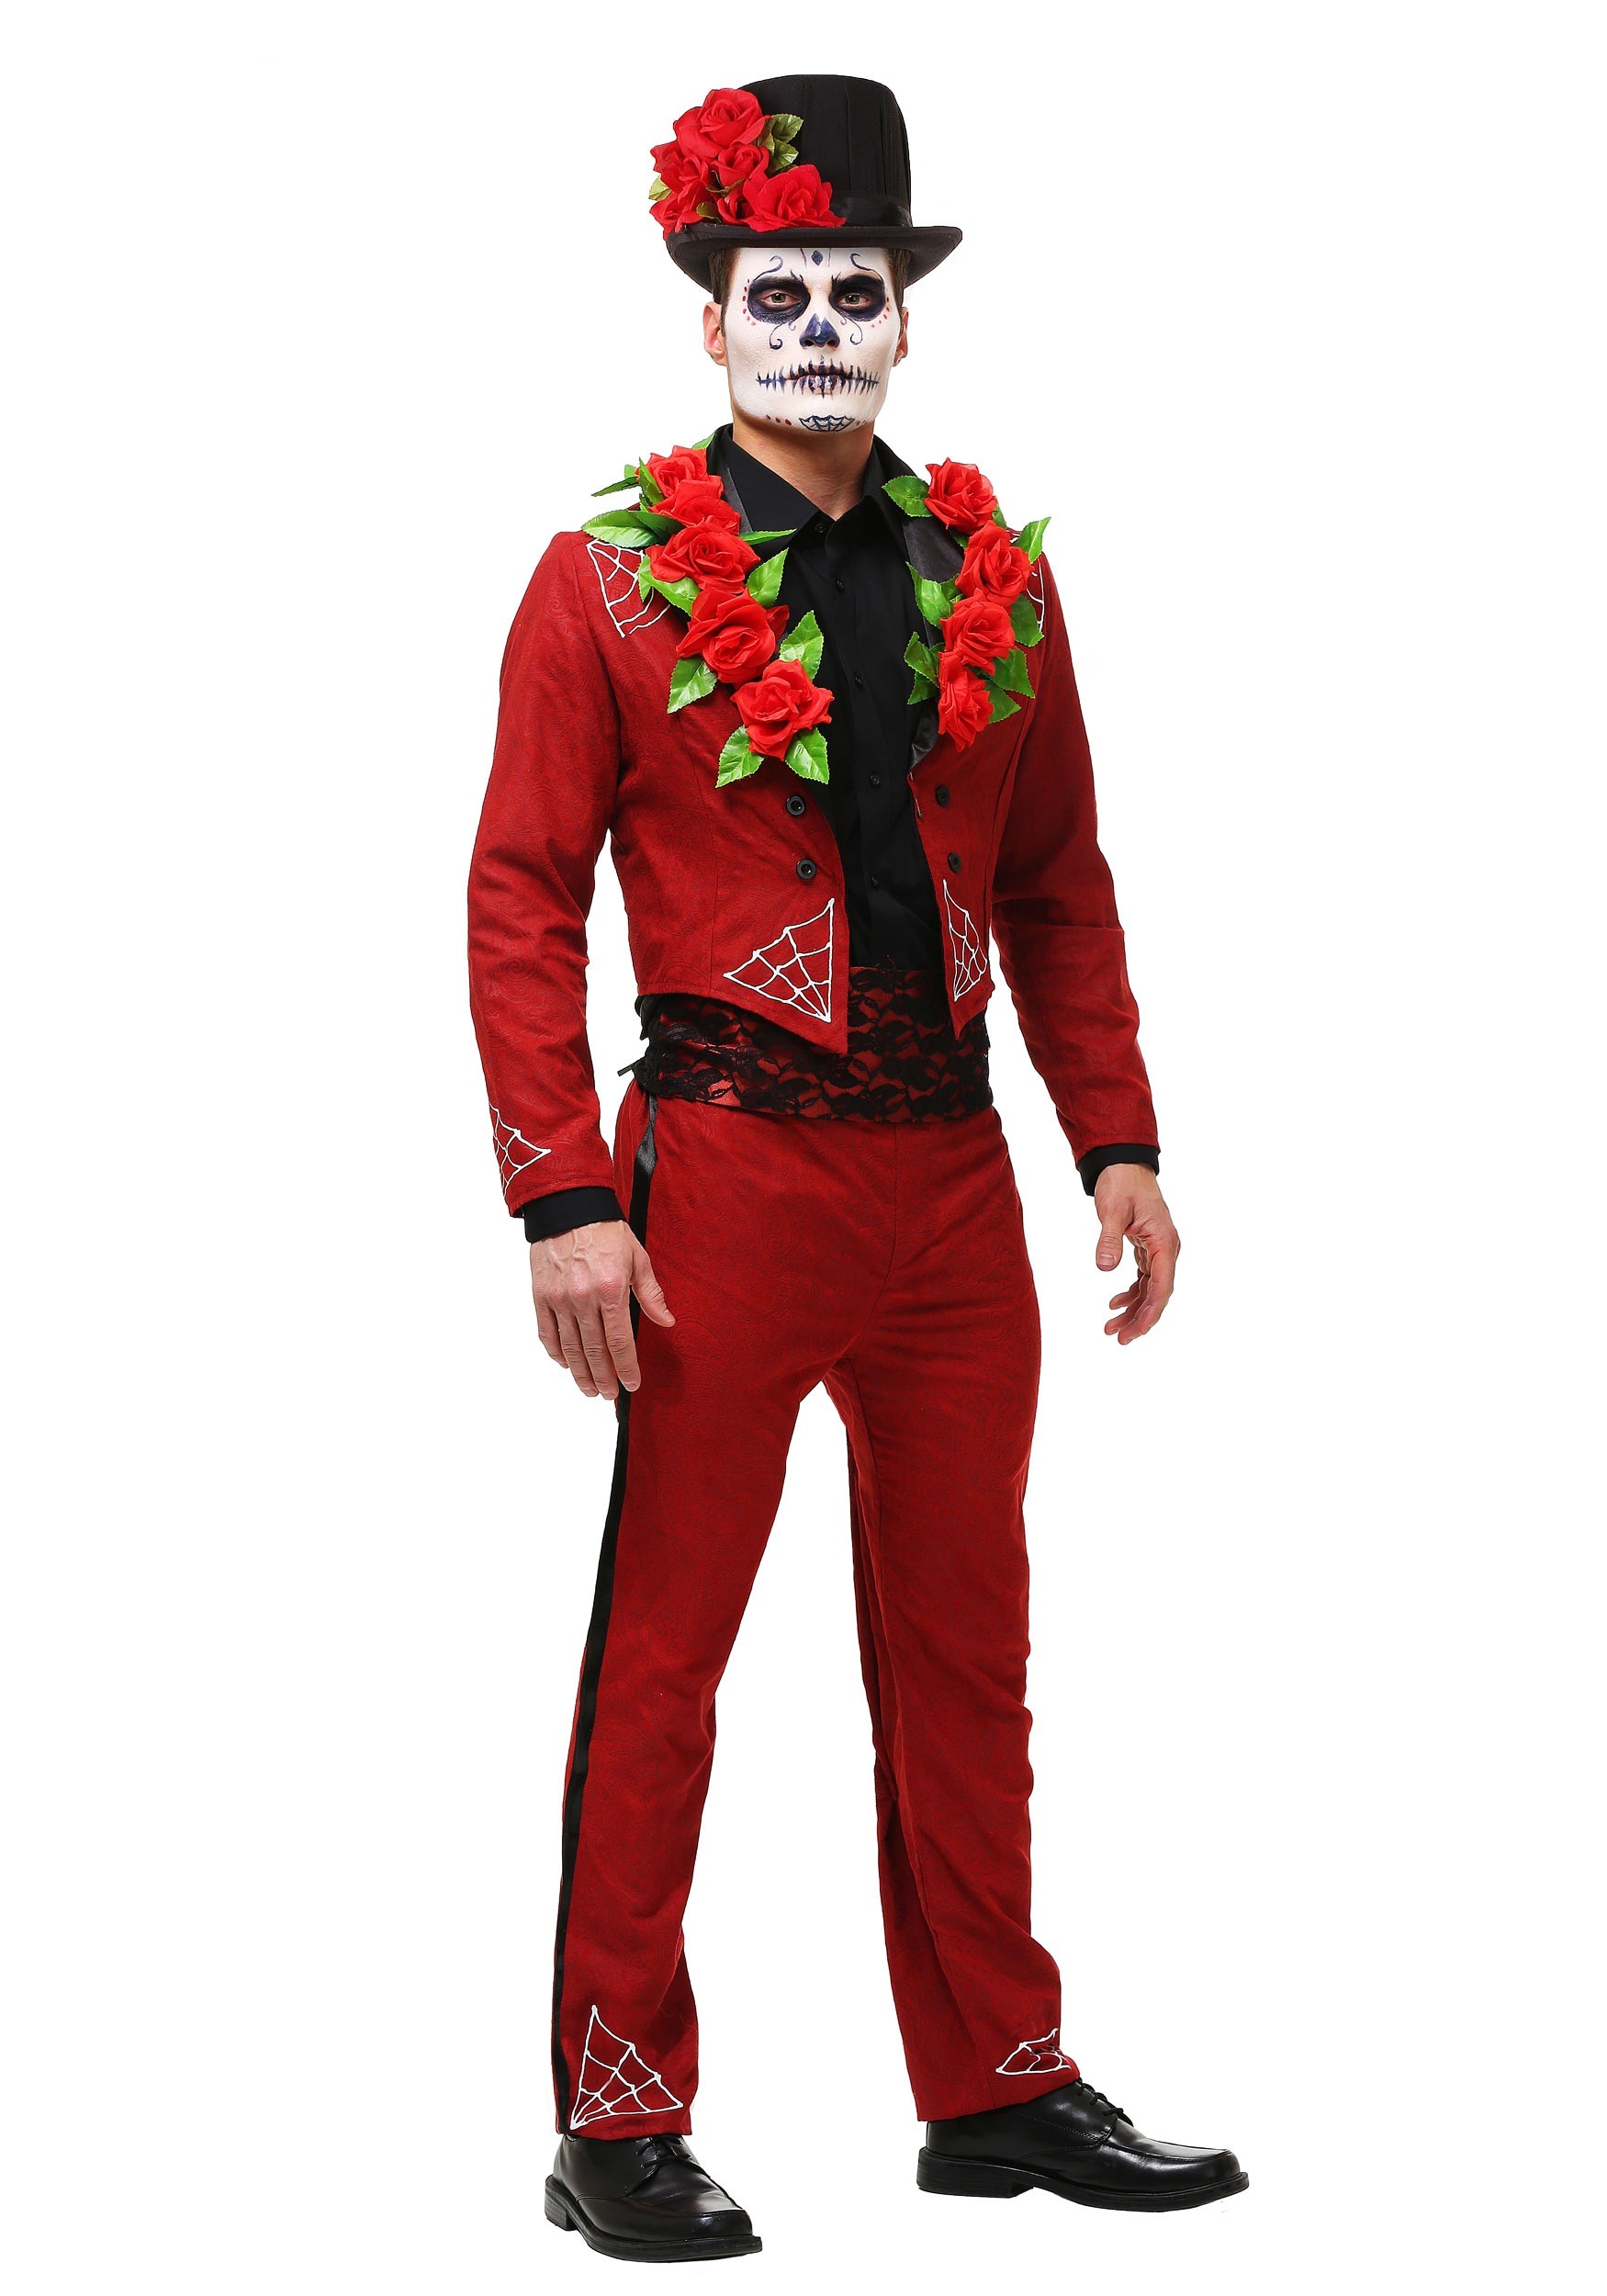 Adult Men’s Plus Size Day of the Dead Costume